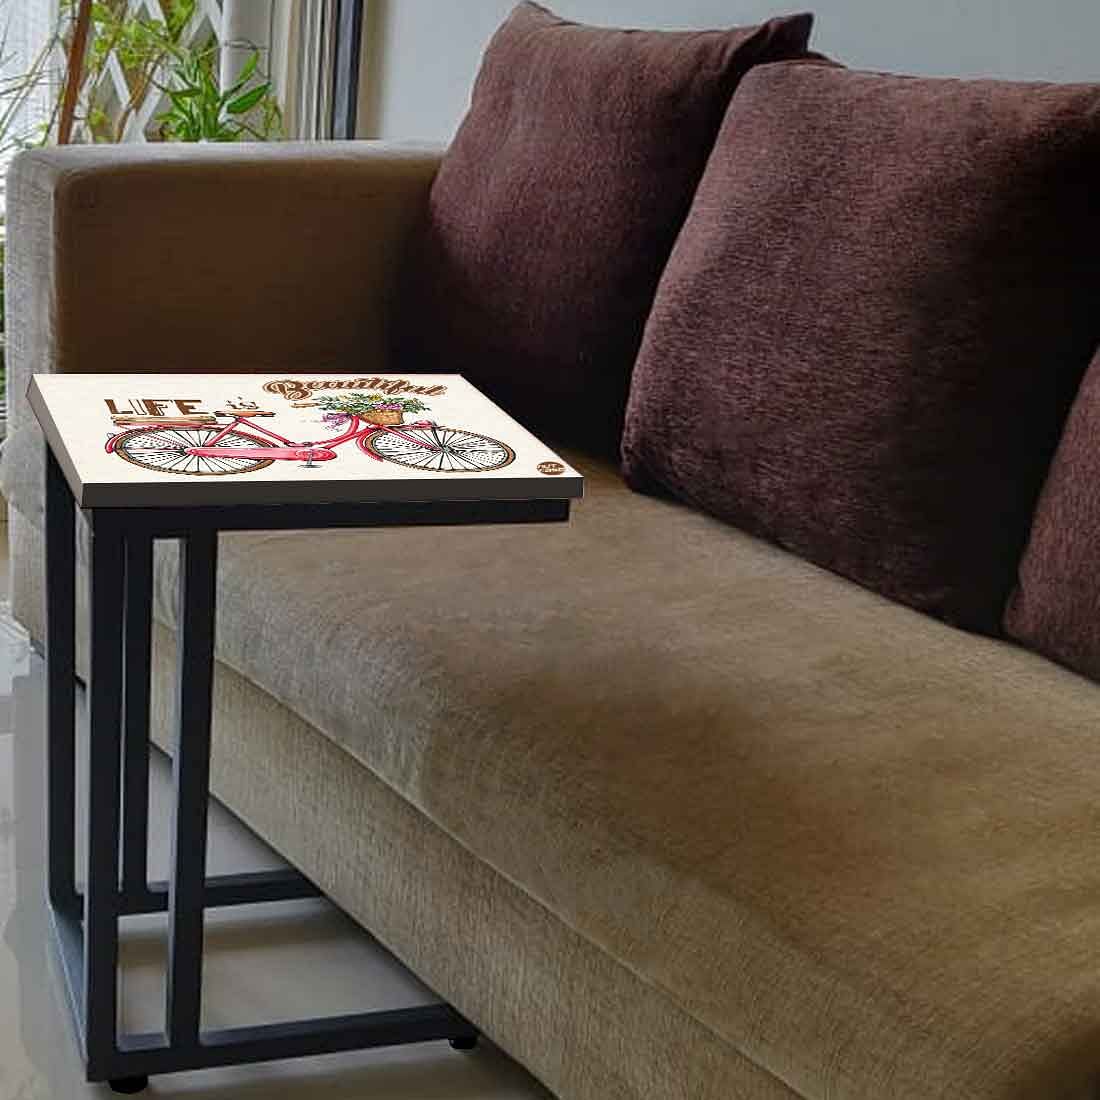 Modern C Side Table - Life is Beautiful Cycle Nutcase